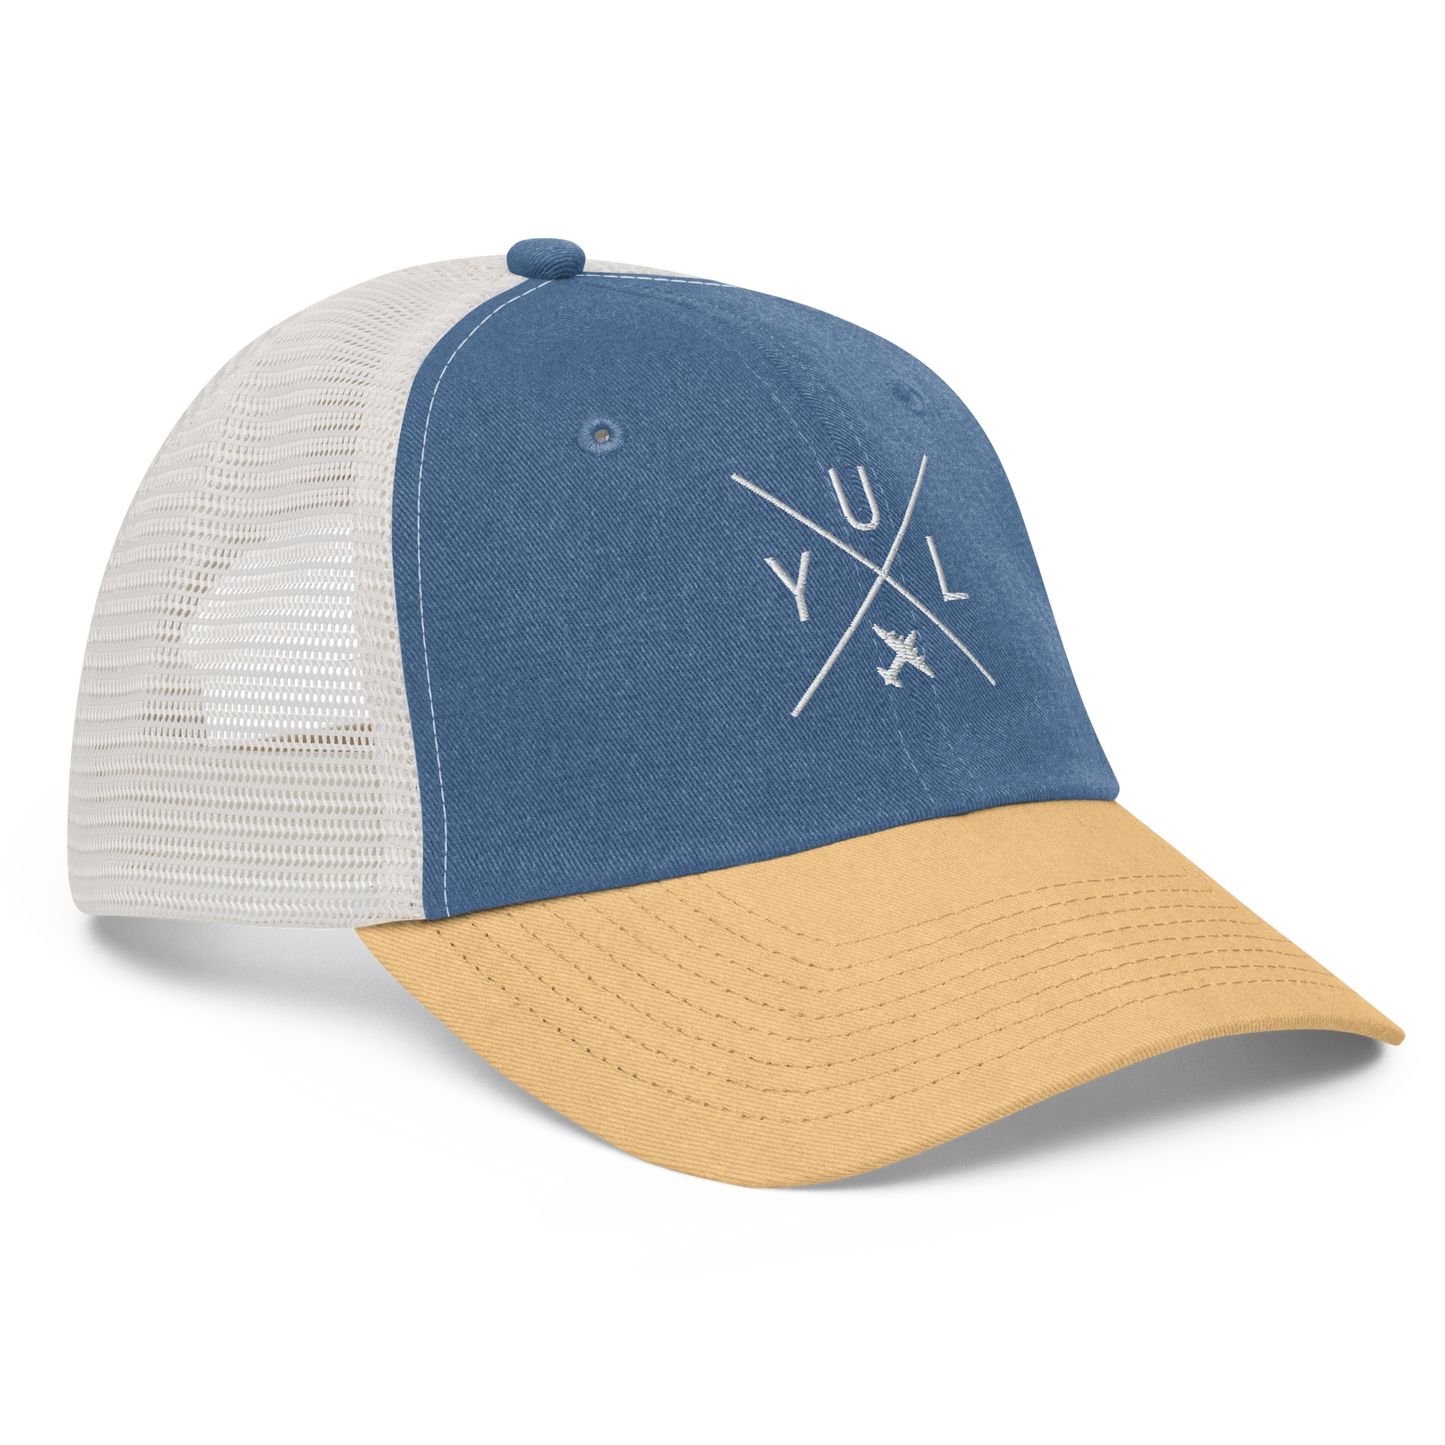 YHM Designs - YUL Montreal Pigment-Dyed Trucker Cap - Crossed-X Design with Airport Code and Vintage Propliner - White Embroidery - Image 18